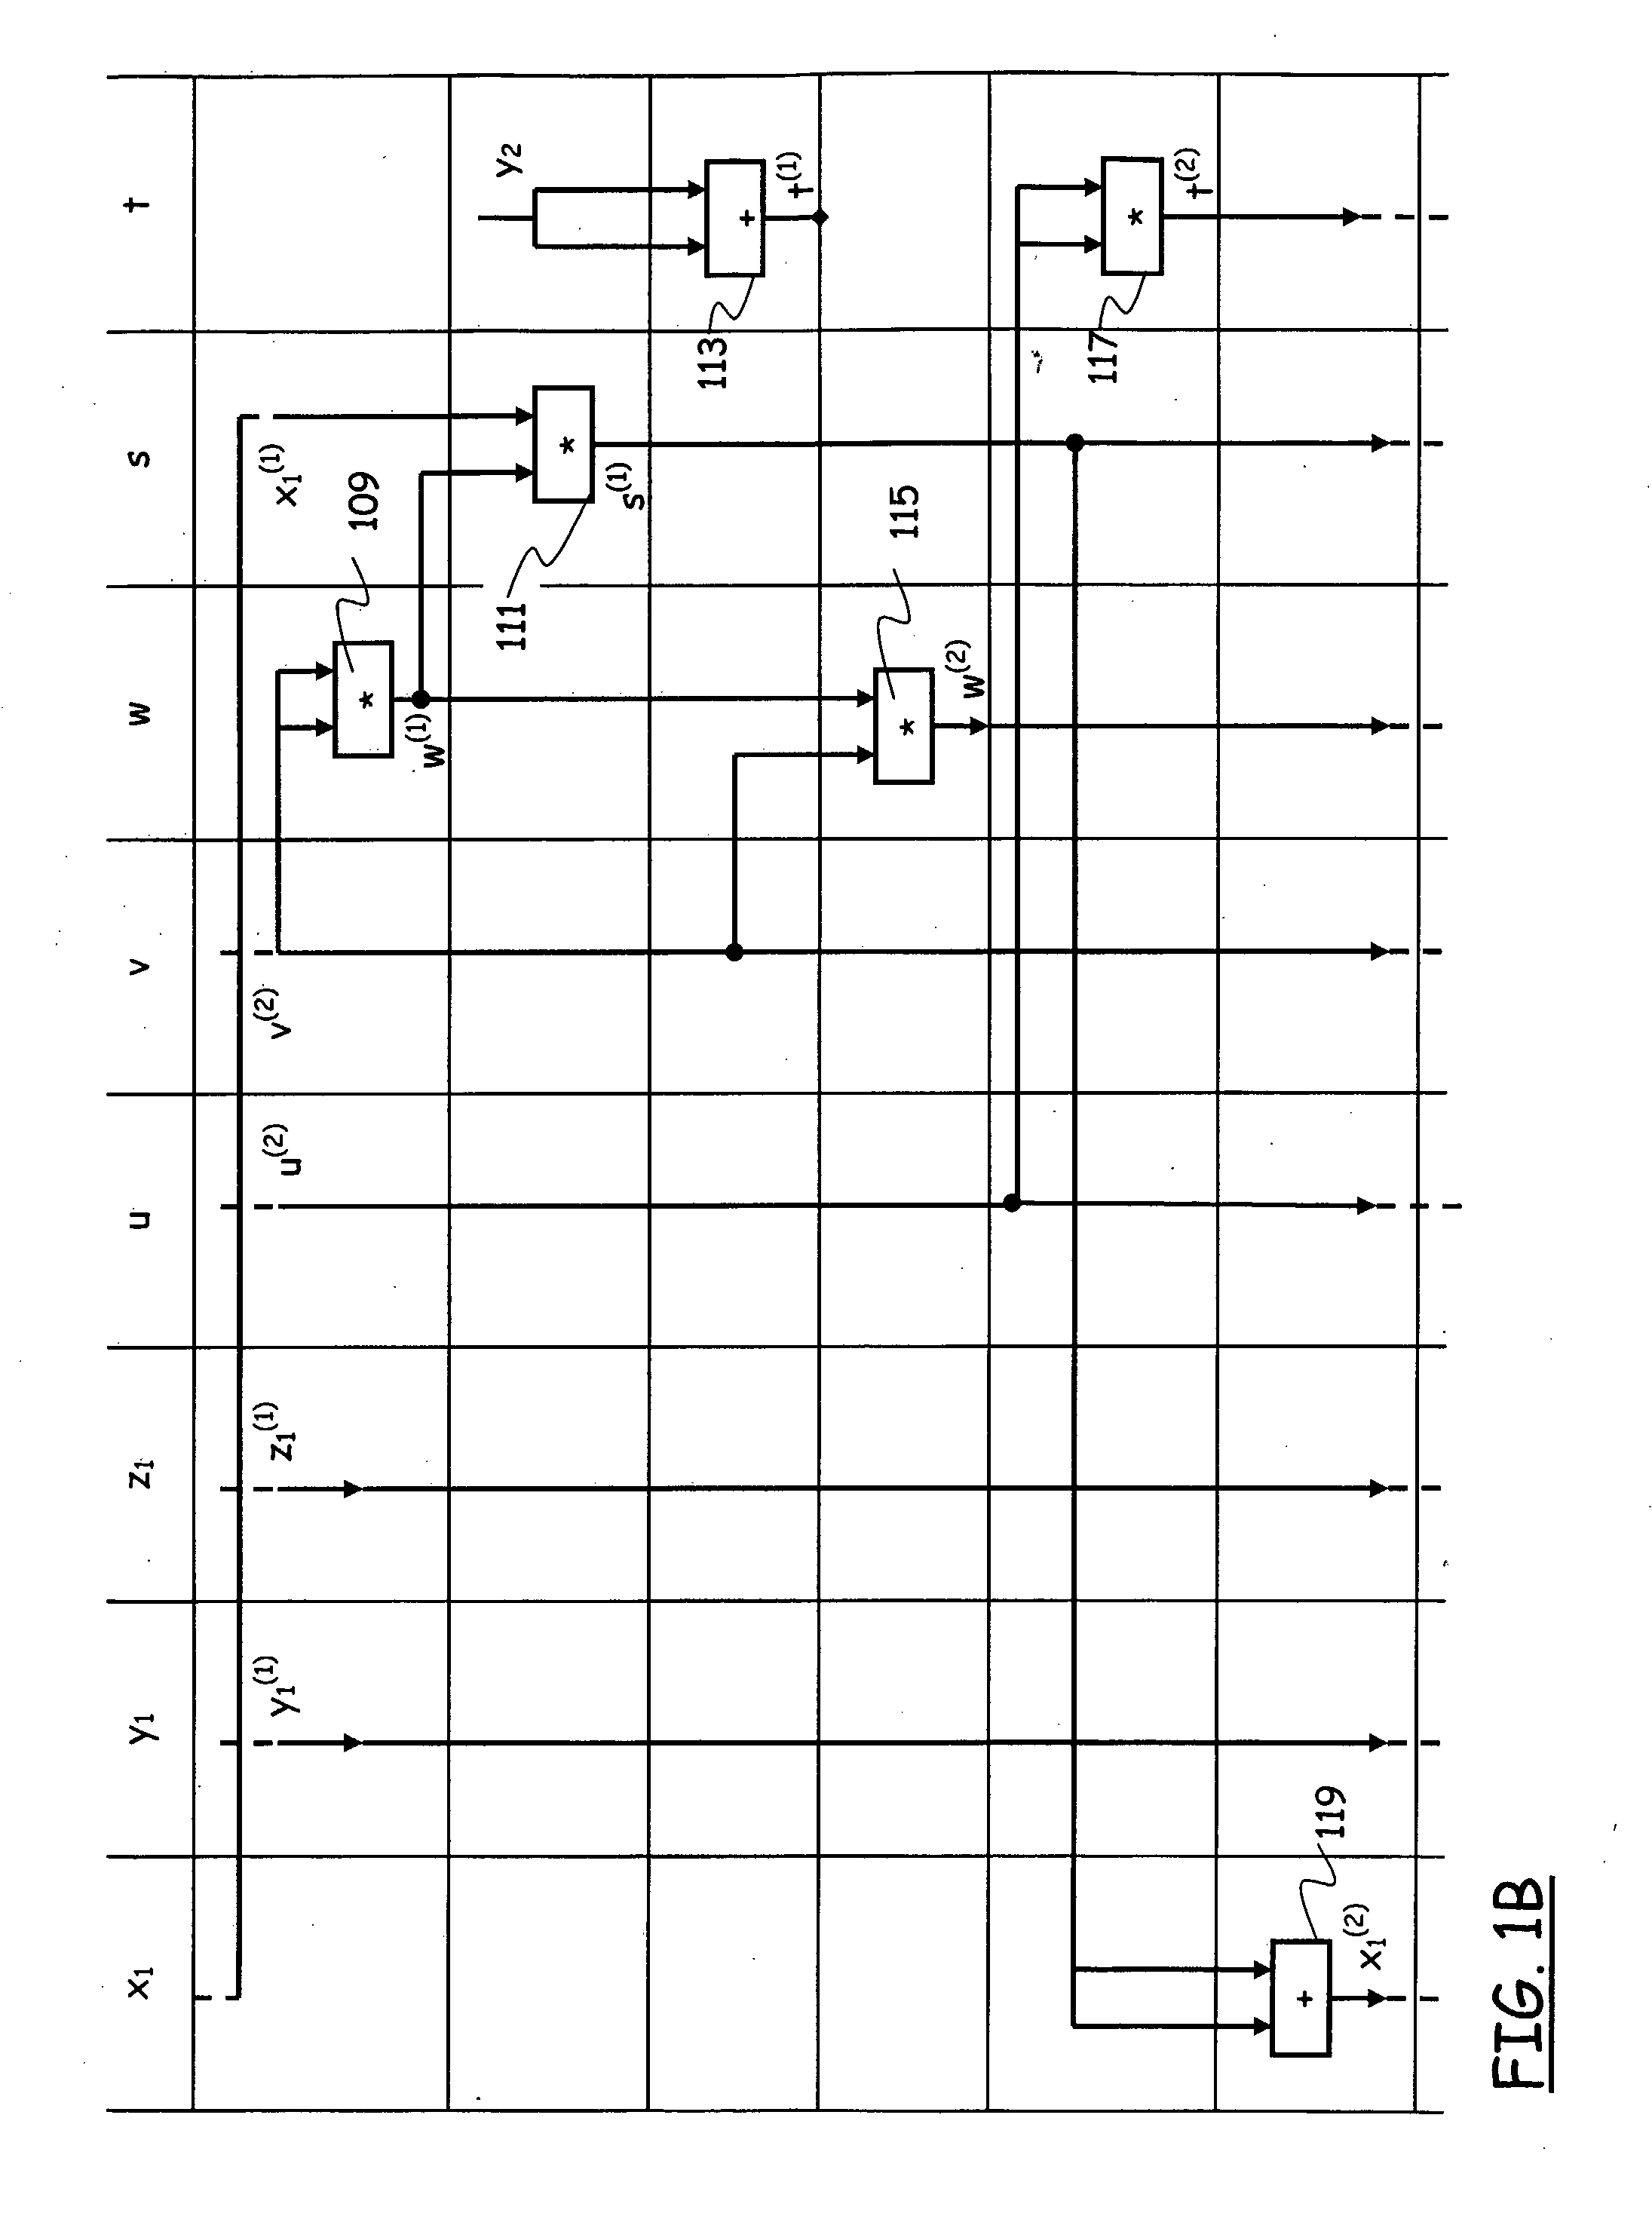 Method for Scalar Multiplication in Elliptic Curve Groups Over Prime Fields for Side-Channel Attack Resistant Cryptosystems